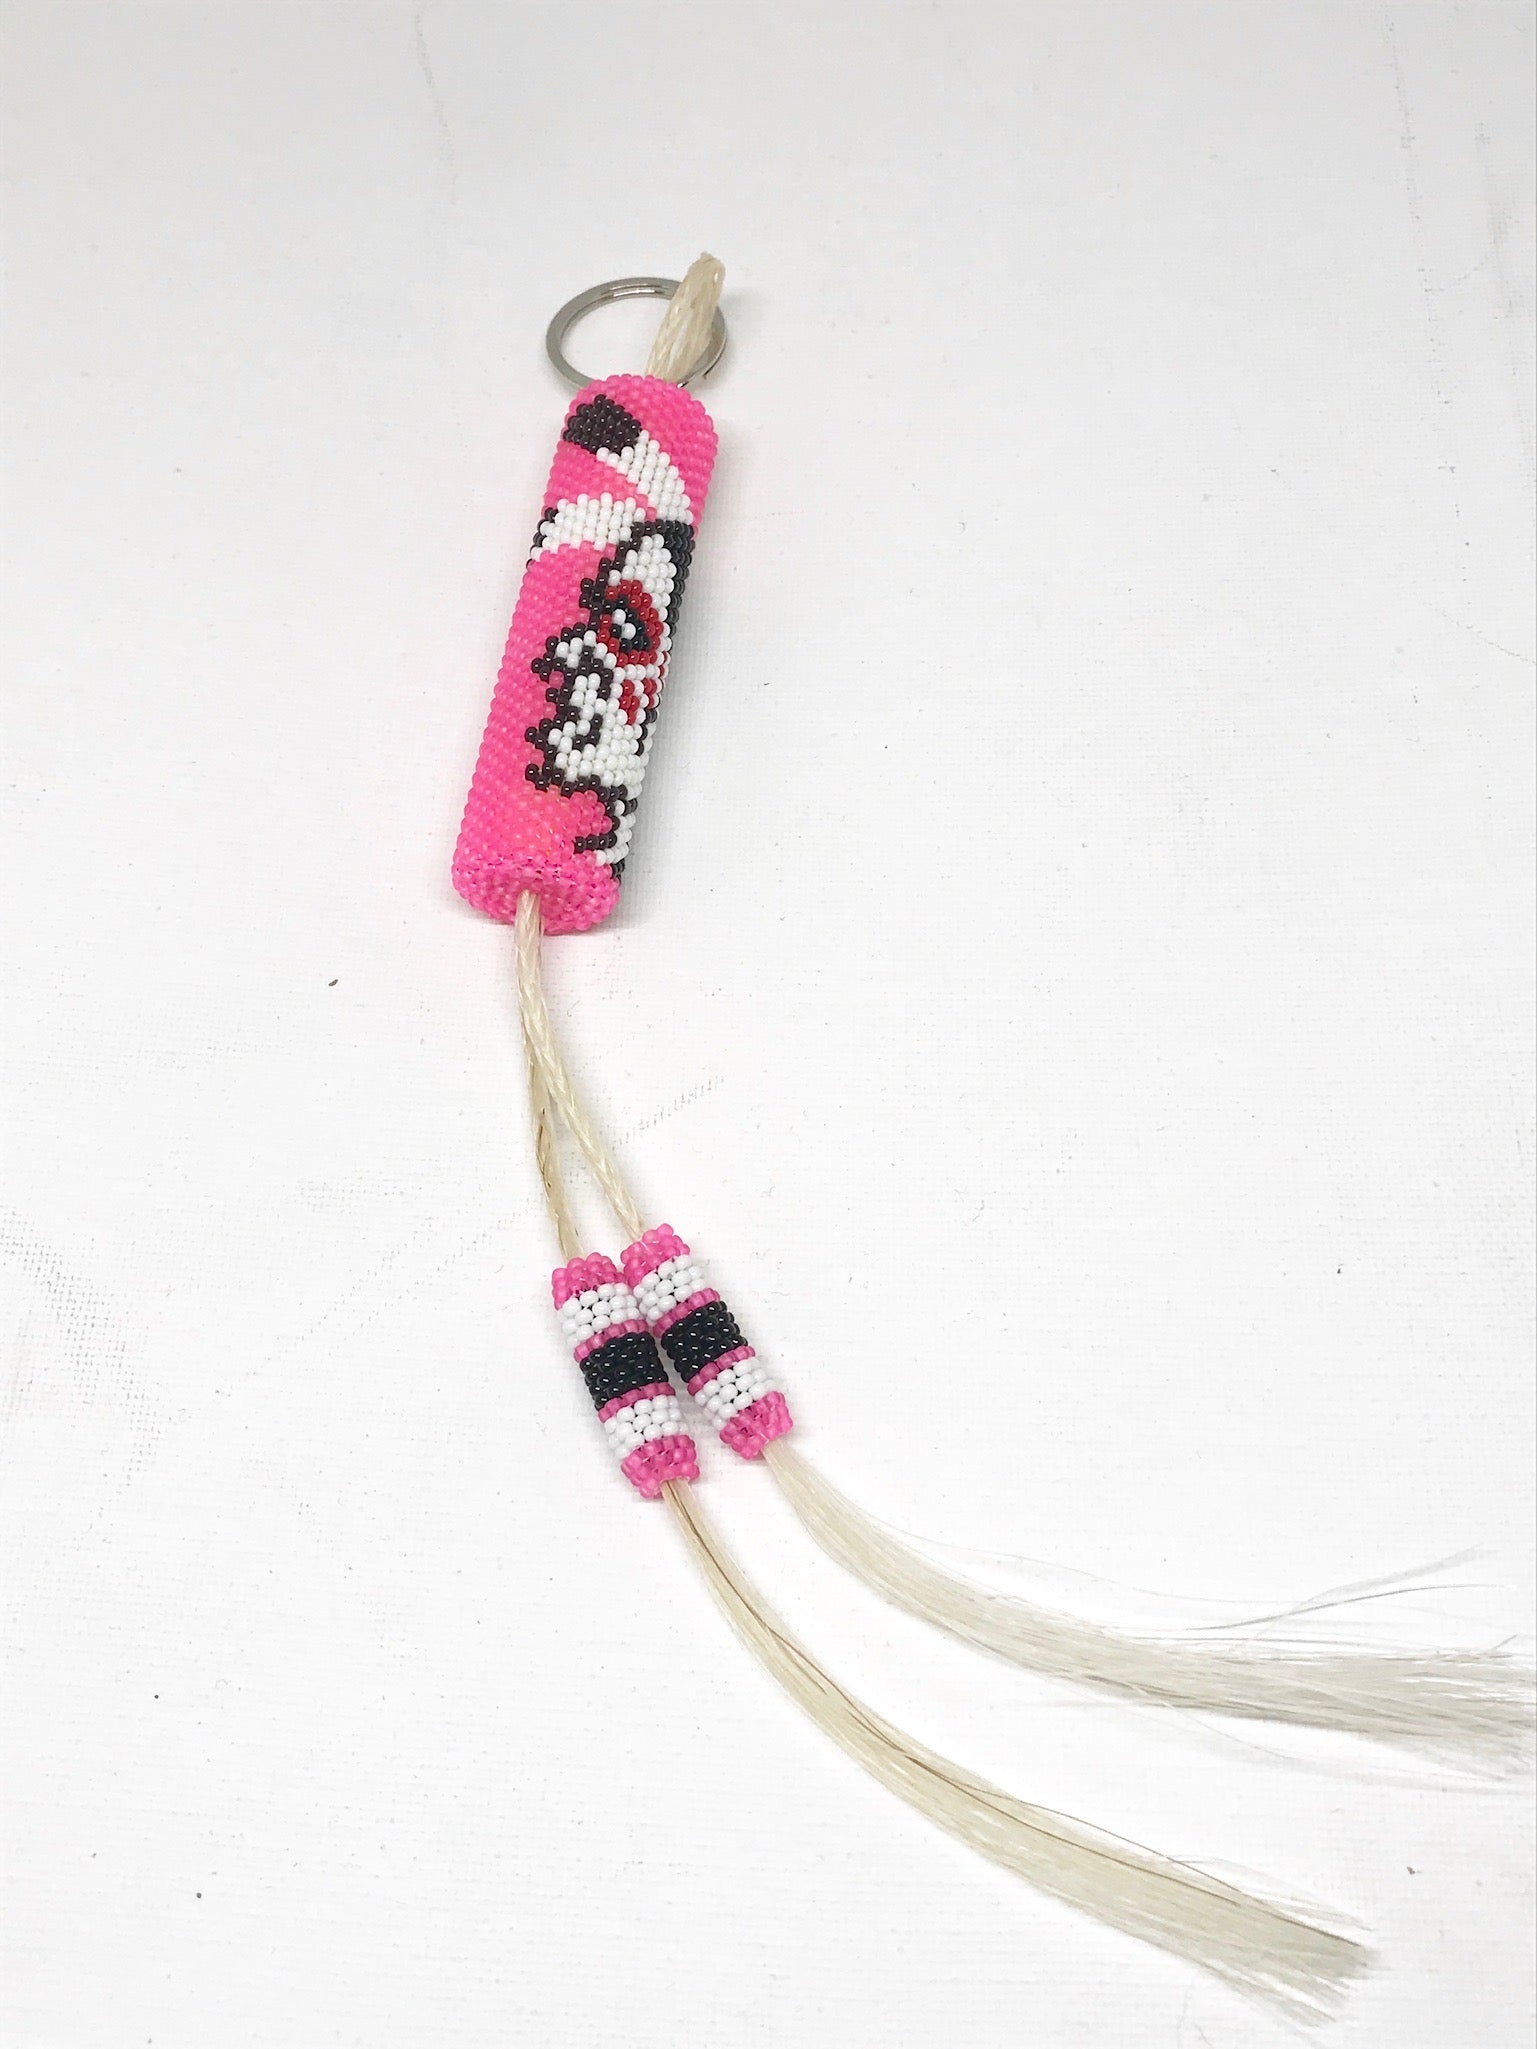 Robert Horse - Beaded Keychain with horse hair - Intertribal Creatives by Running Strong for American Indian Youth